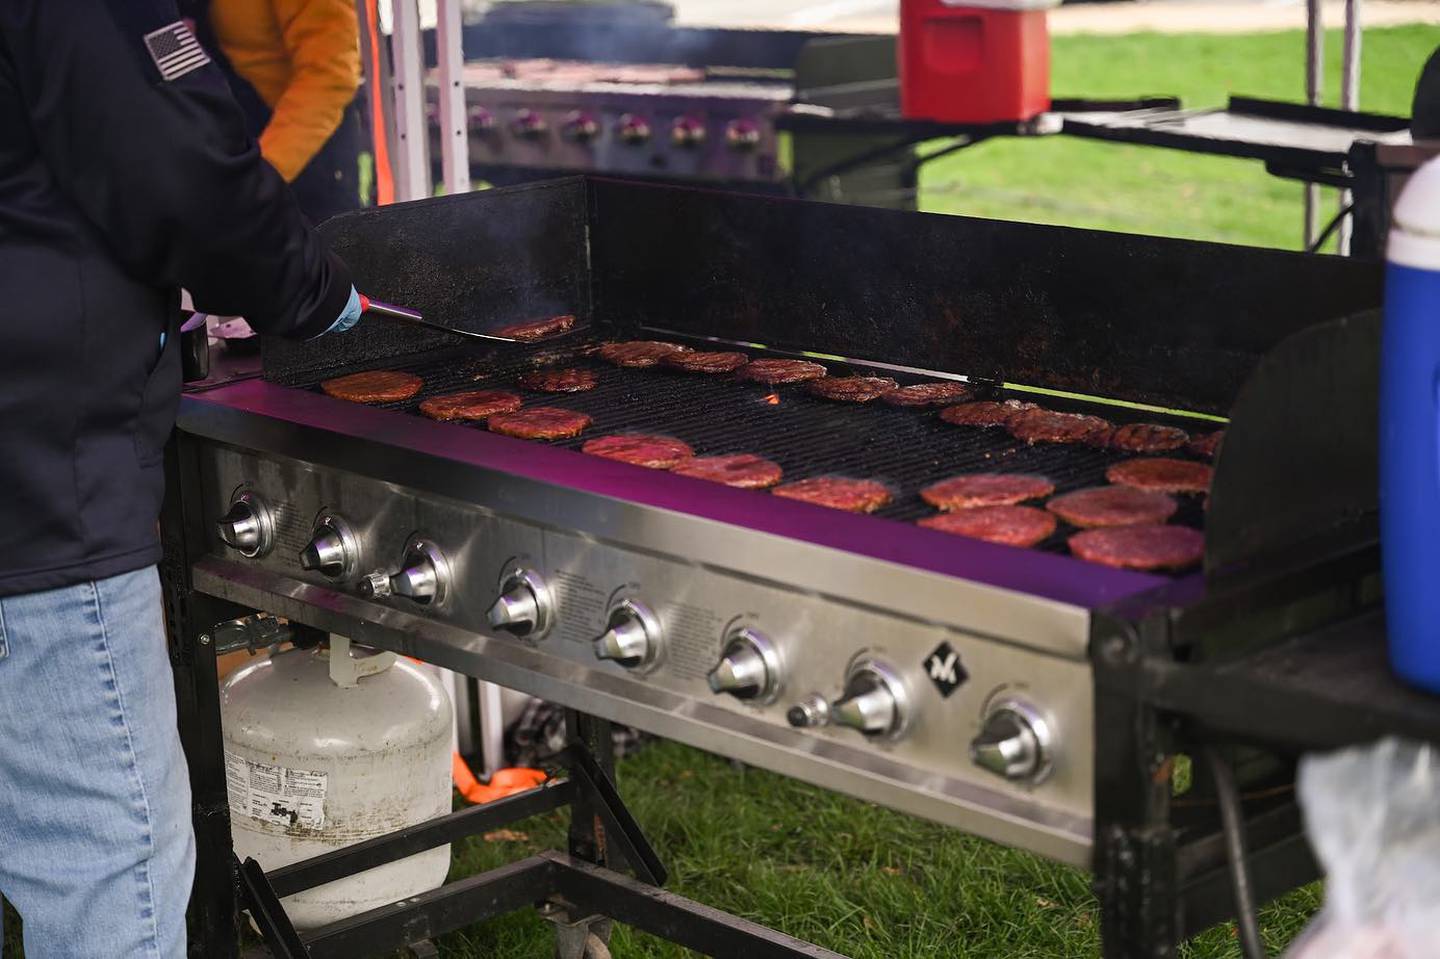 Fresh burgers were served on Wednesday during Ag Week.